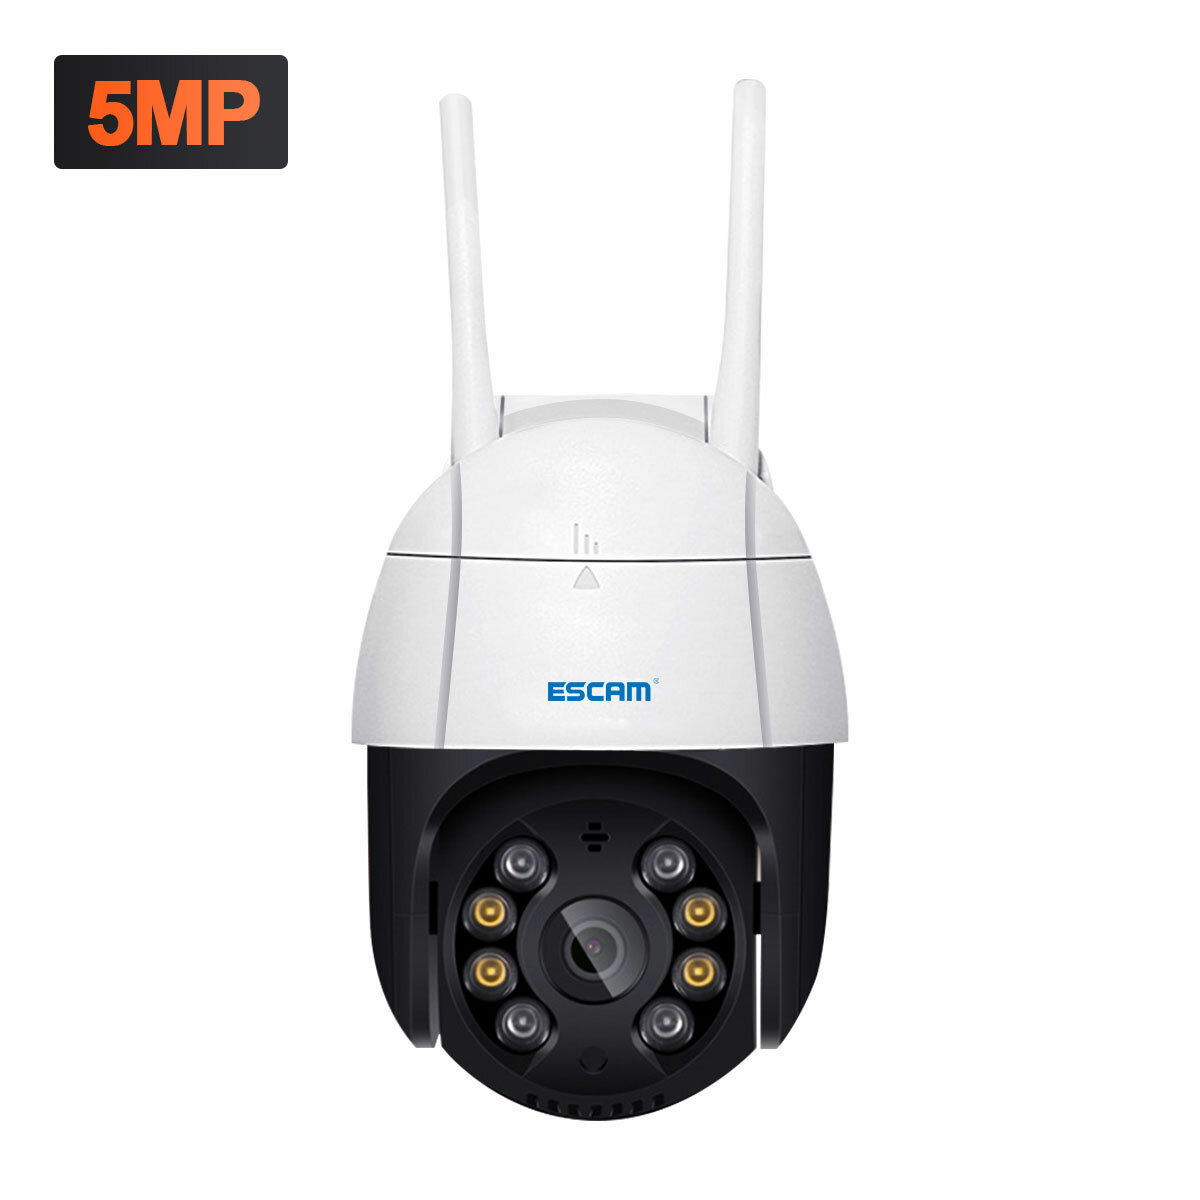 ESCAM QF518 5MP Pan/Tilt AI Humanoid Detection Auto Tracking Cloud Storage Waterproof WiFi IP Camera with Two Way Audio